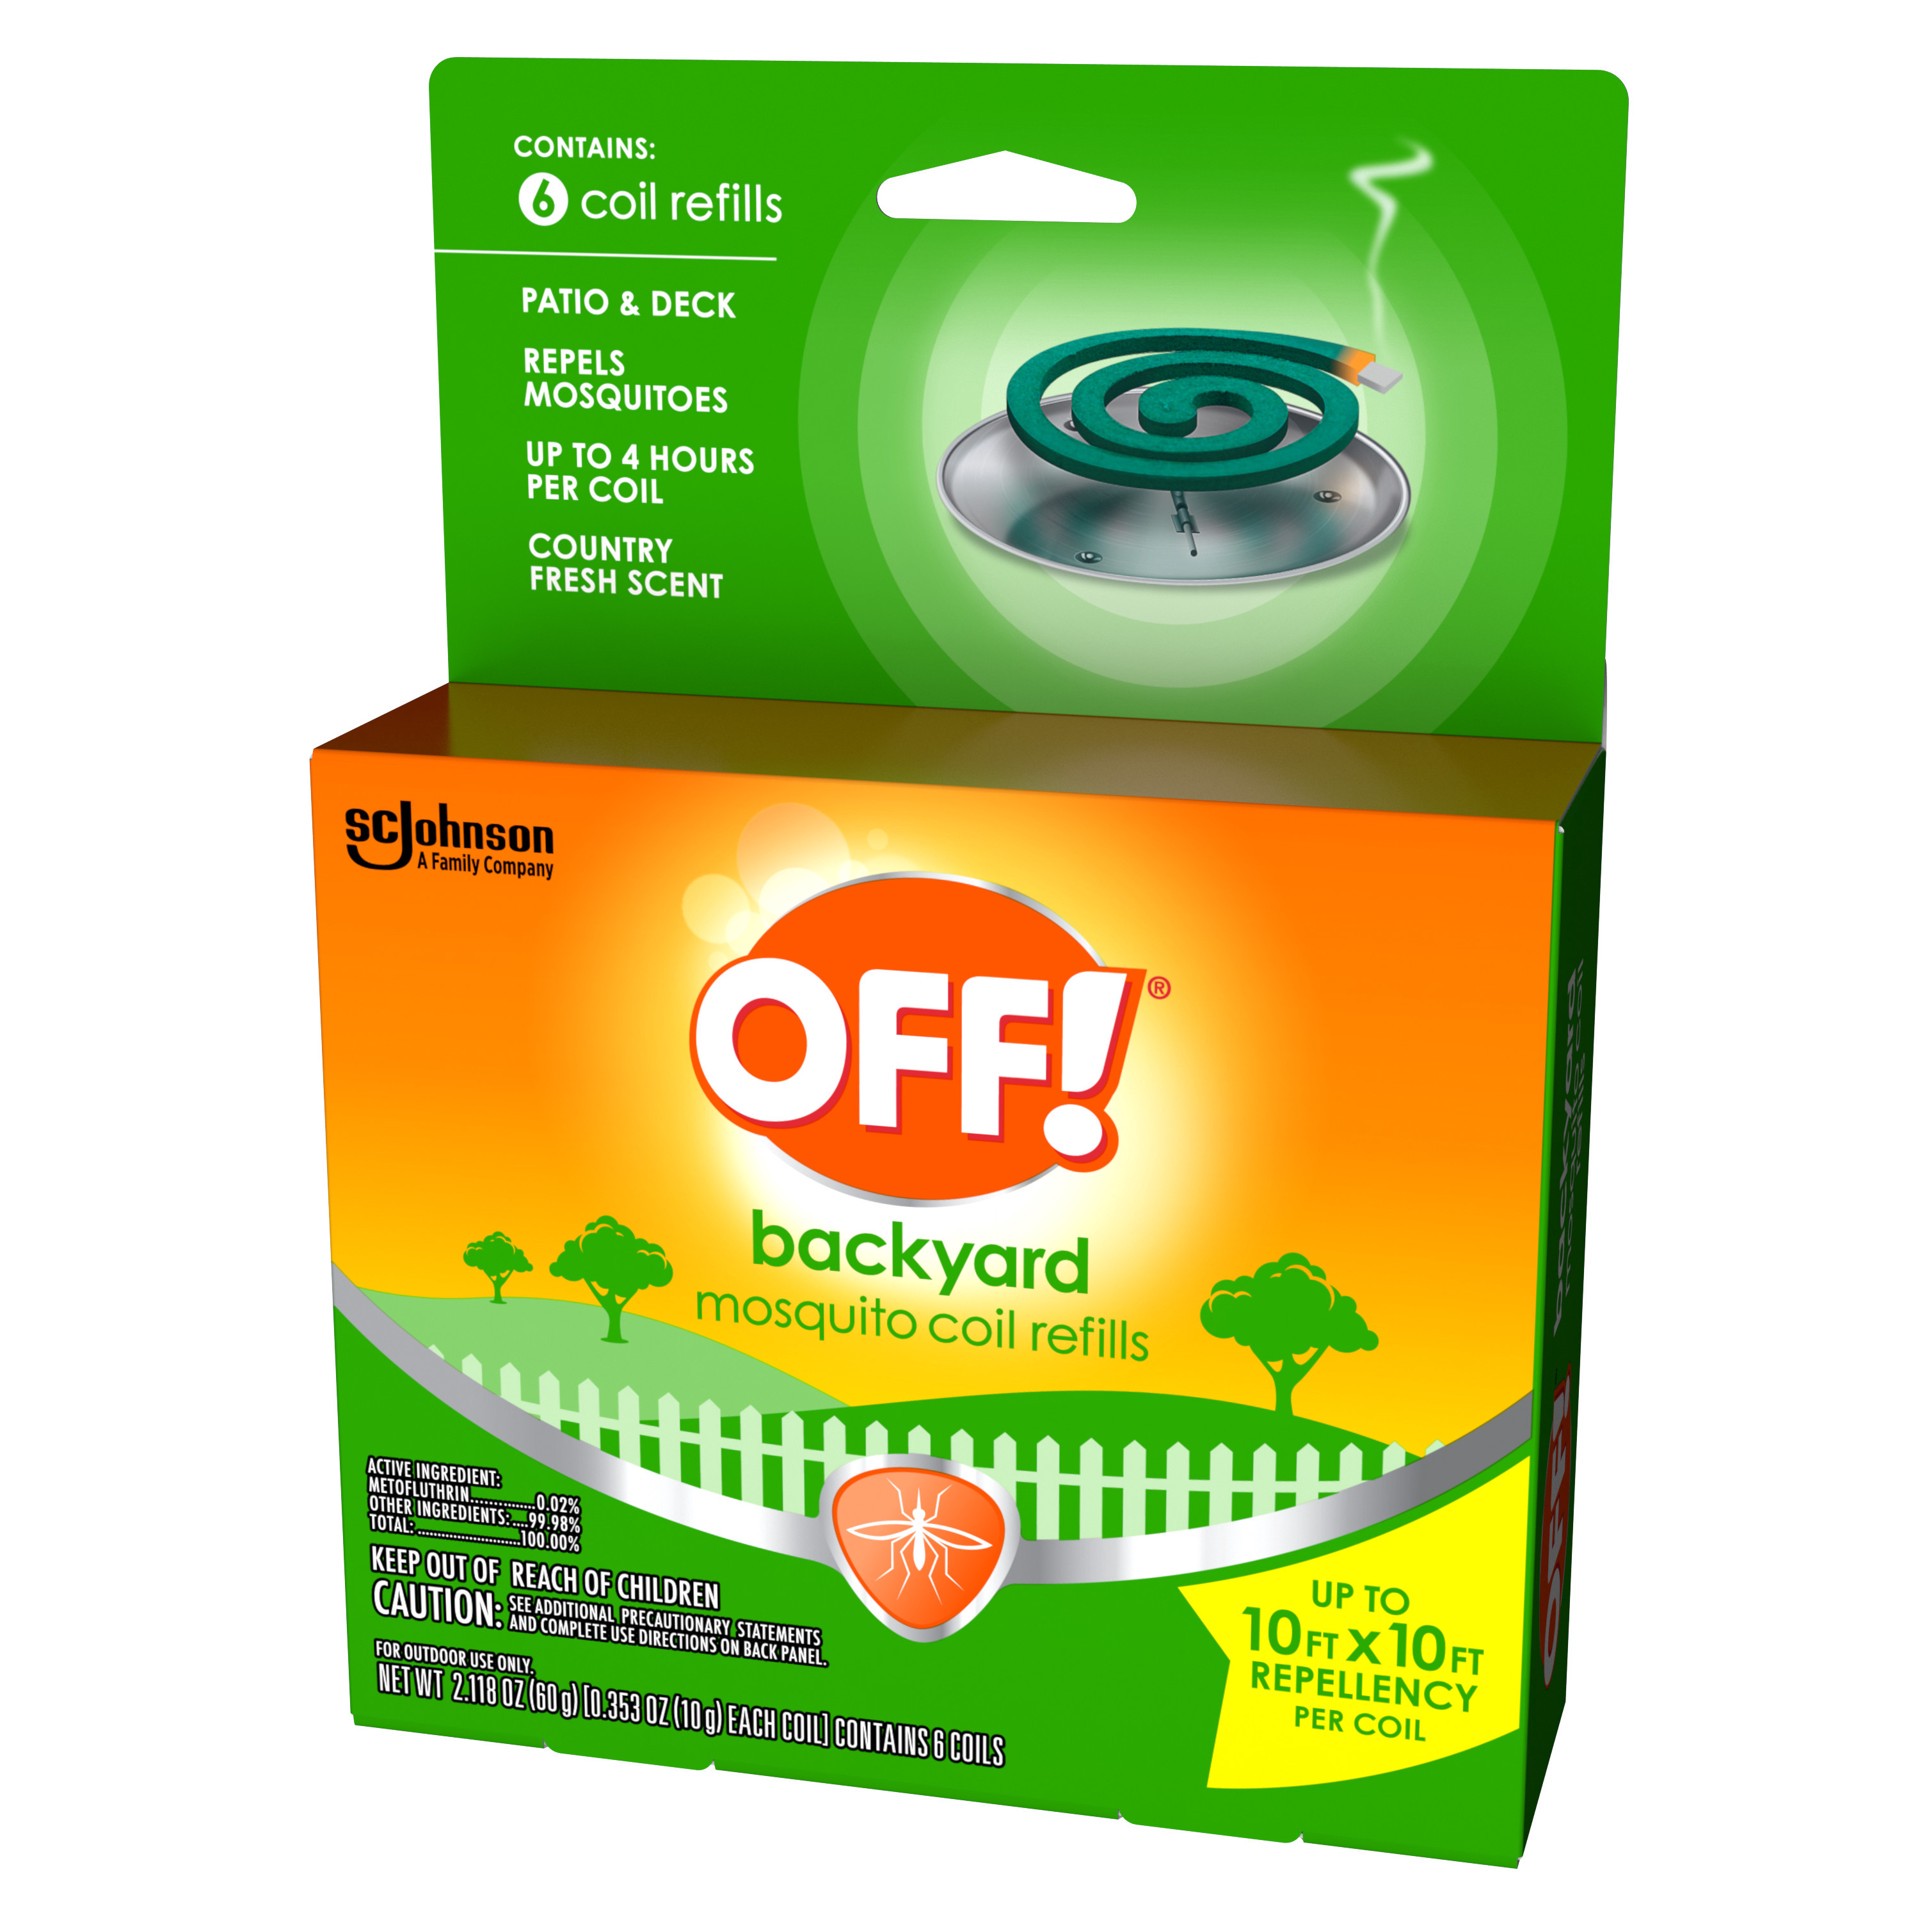 slide 4 of 5, OFF! Patio & Deck Mosquito Coil Refills, 6 ct